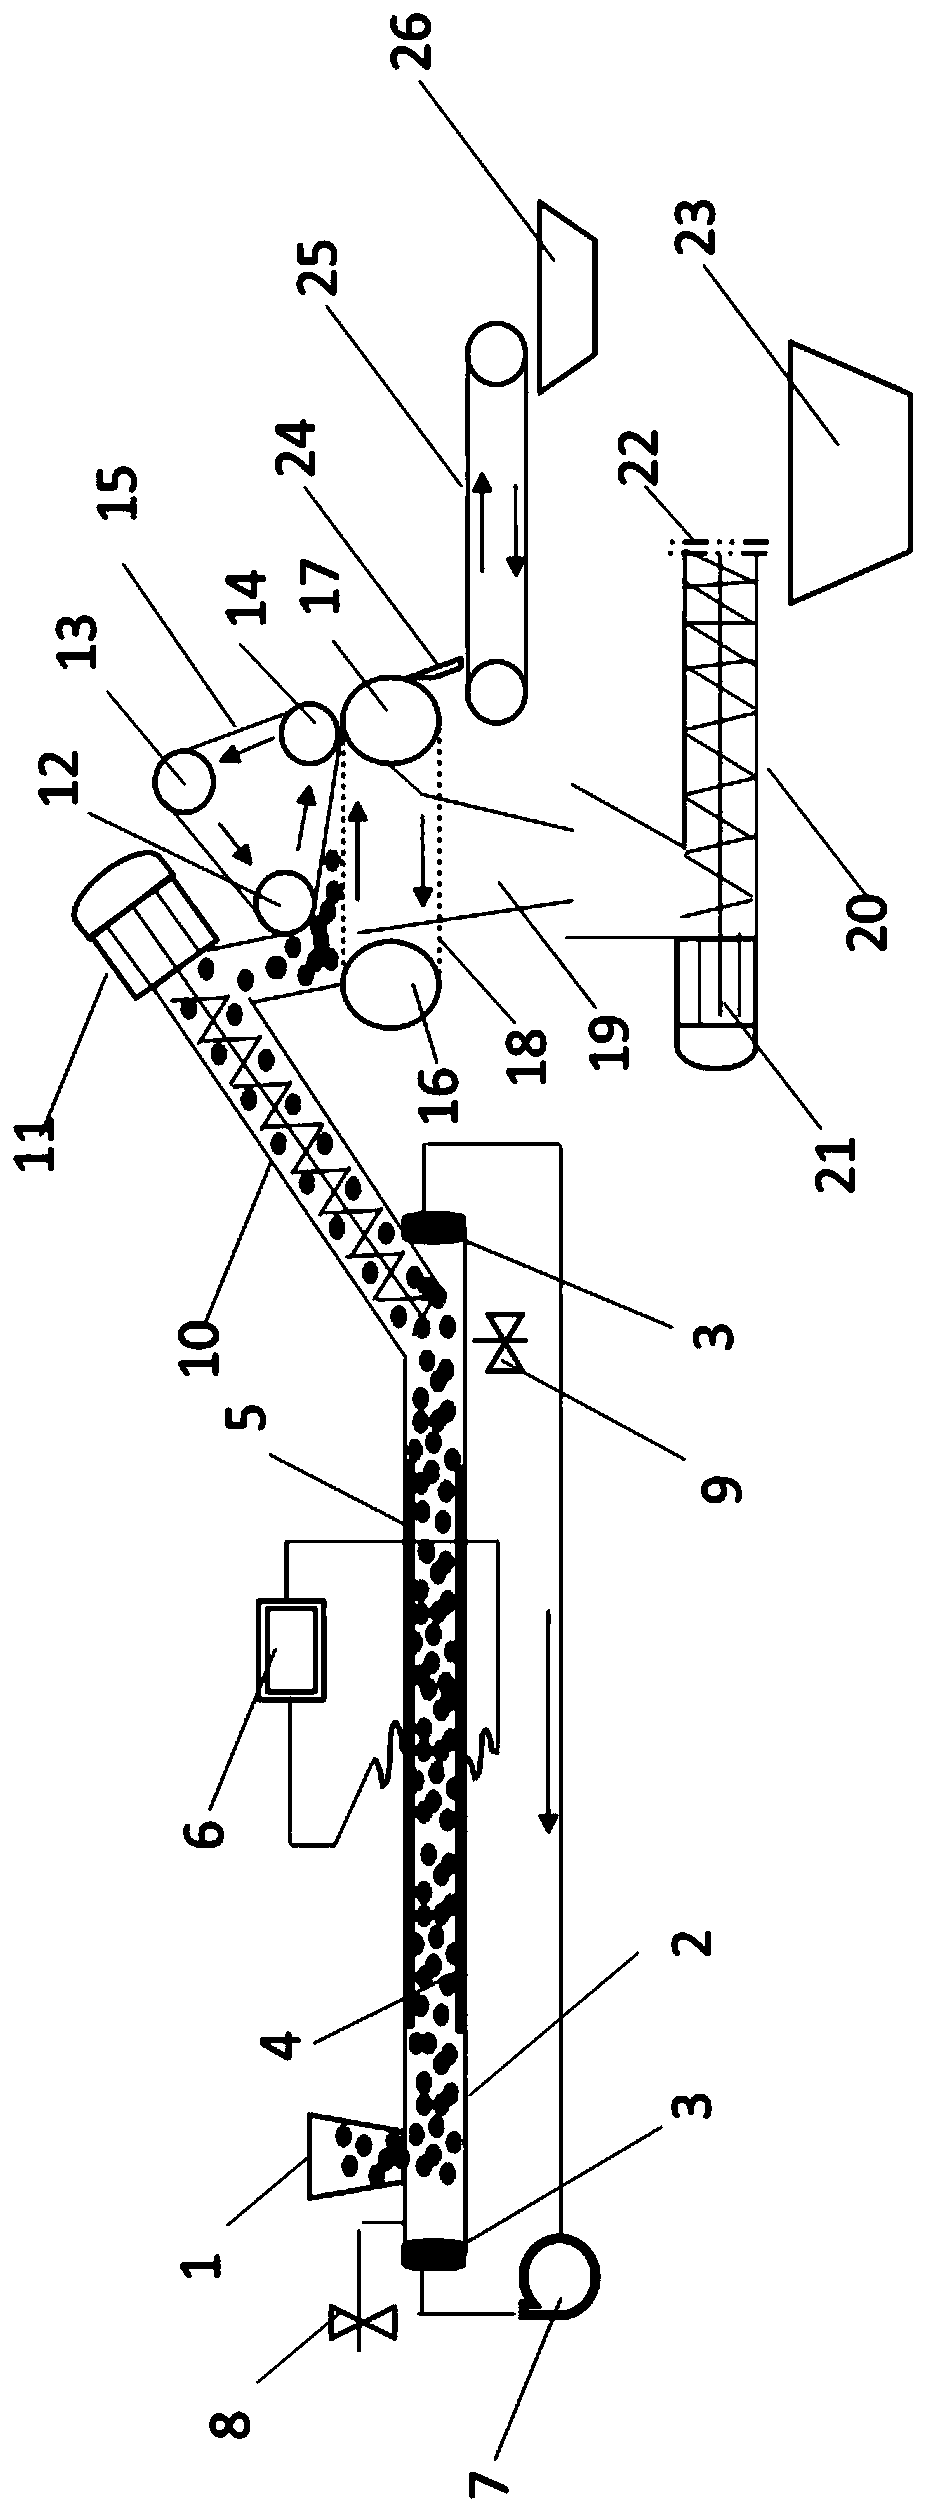 Apparatus for preparing mashed potato and method thereof